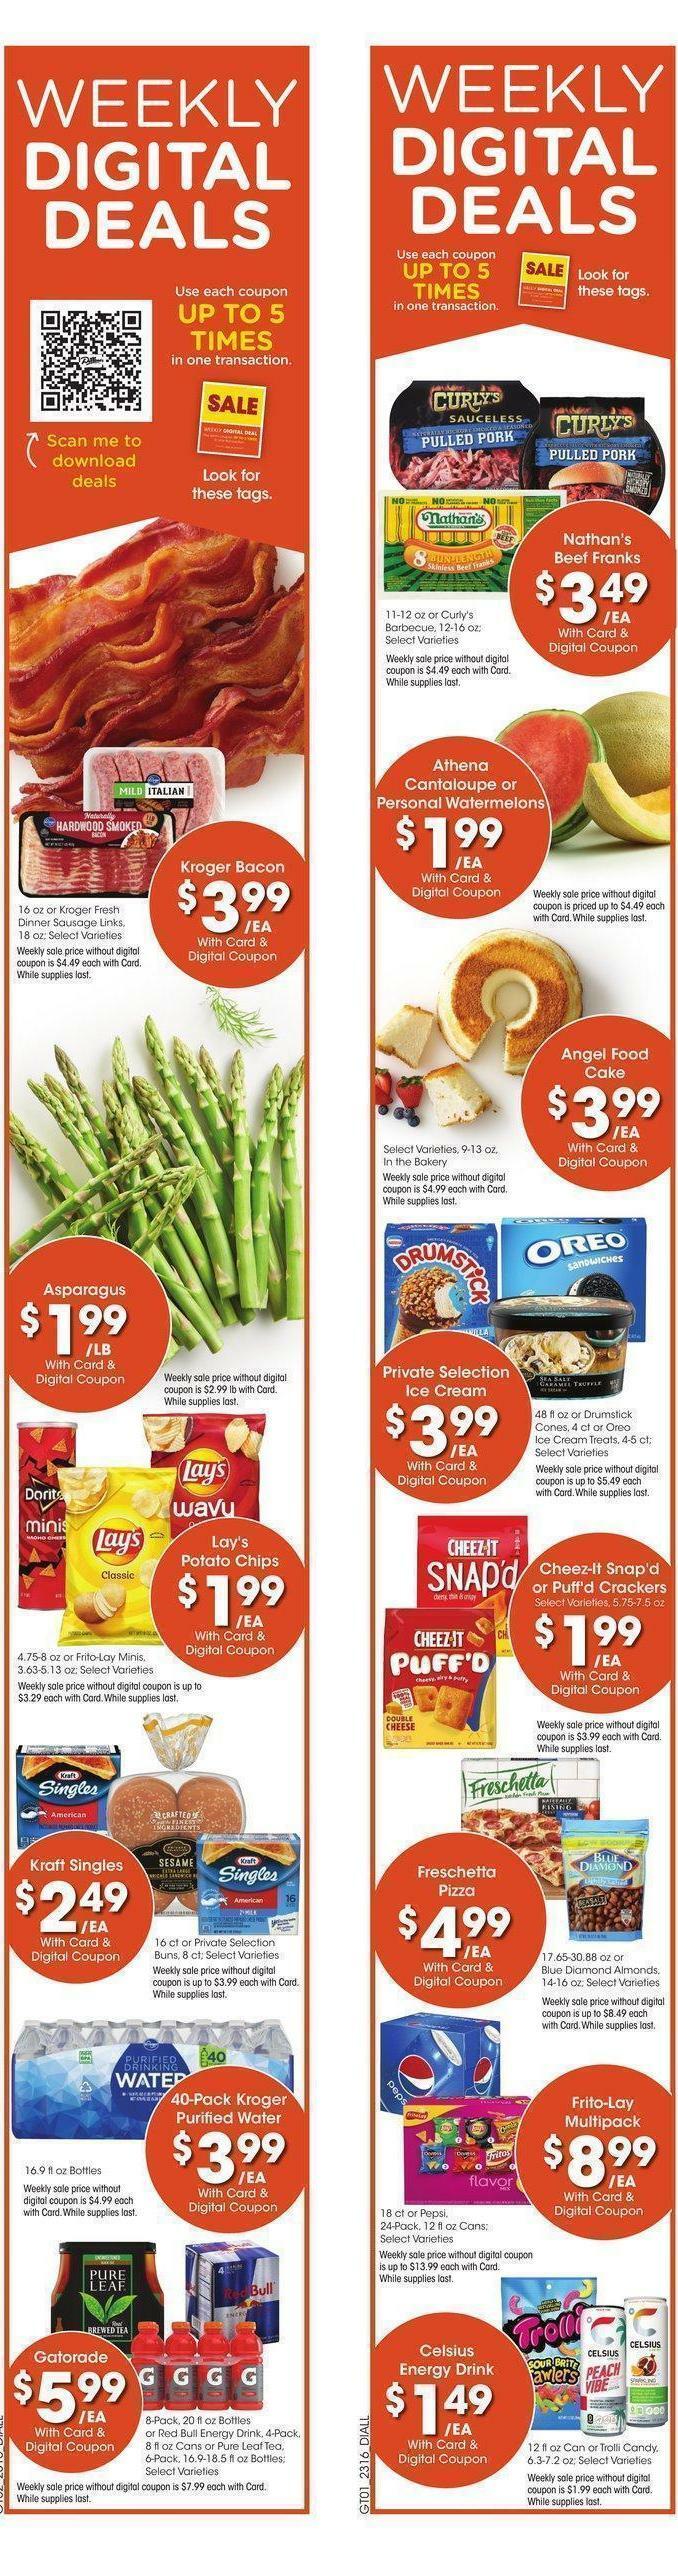 Dillons Weekly Ad from May 17